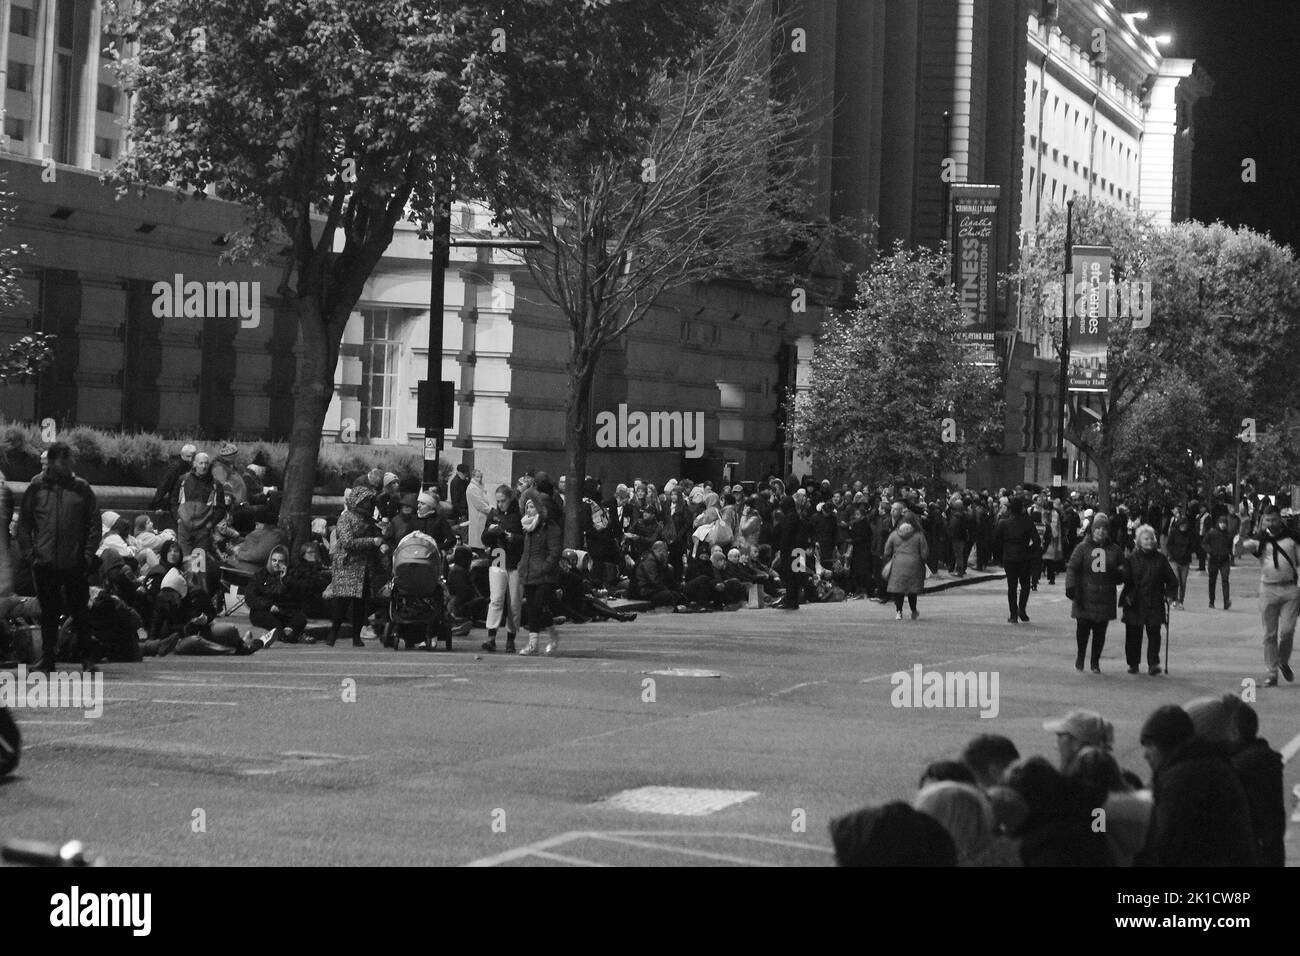 People are queueing to see the queen in state for 24 hours now. the queue is long very long and people have to wait a lot of hours 16/9/2022 blitz pictures Stock Photo